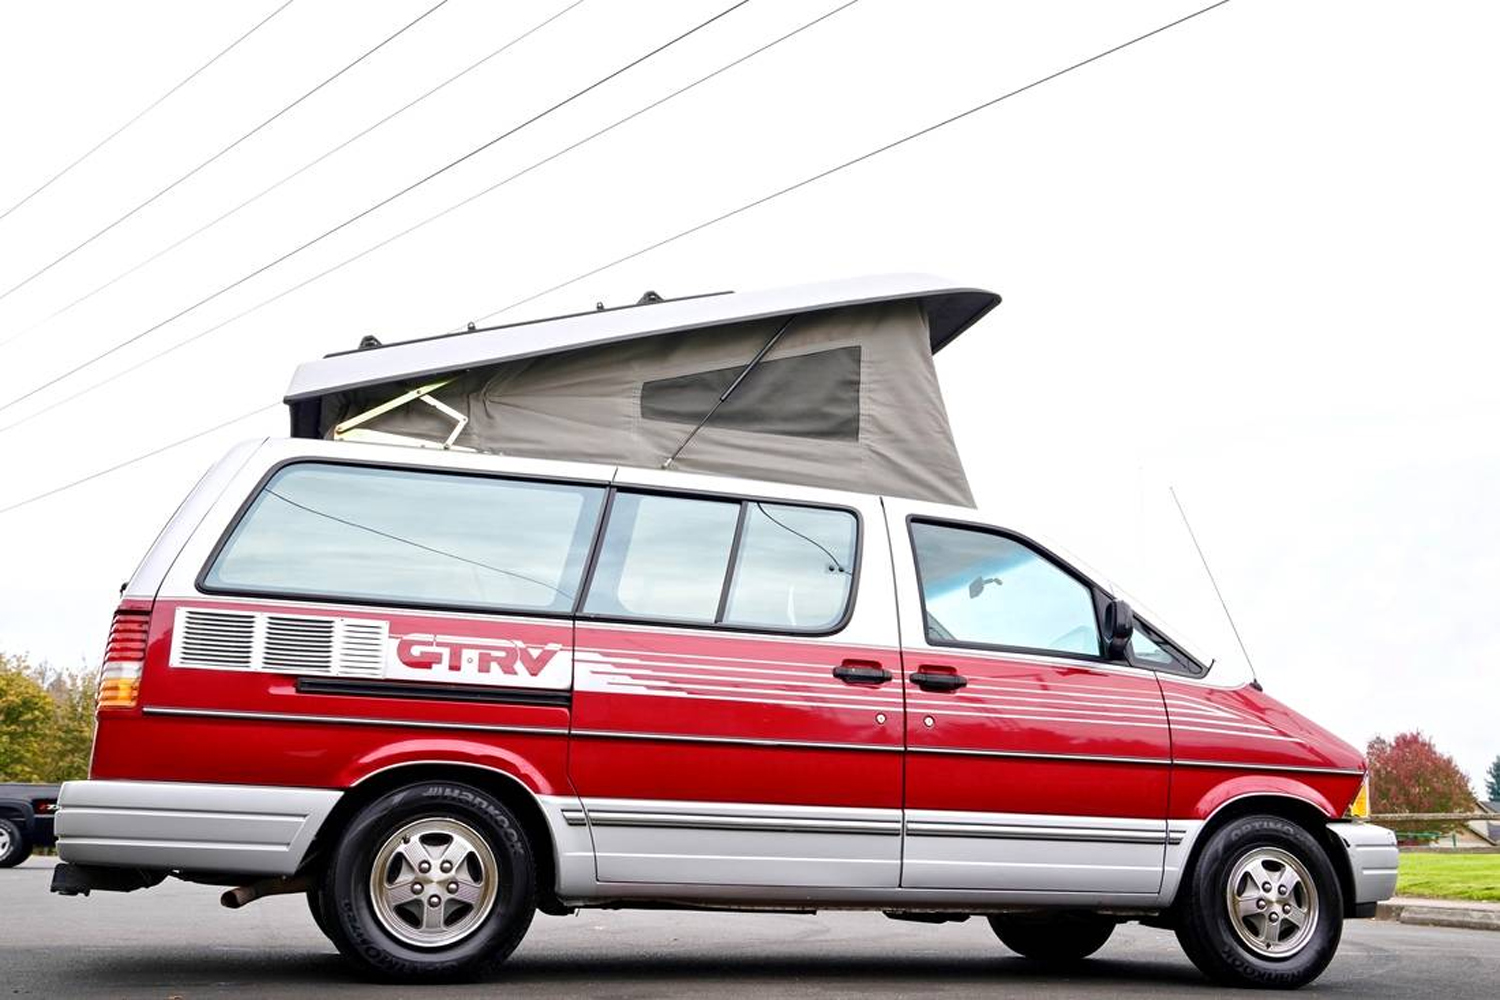 We Didn't Even Know A 1997 Ford Aerostar GTRV Camper Existed